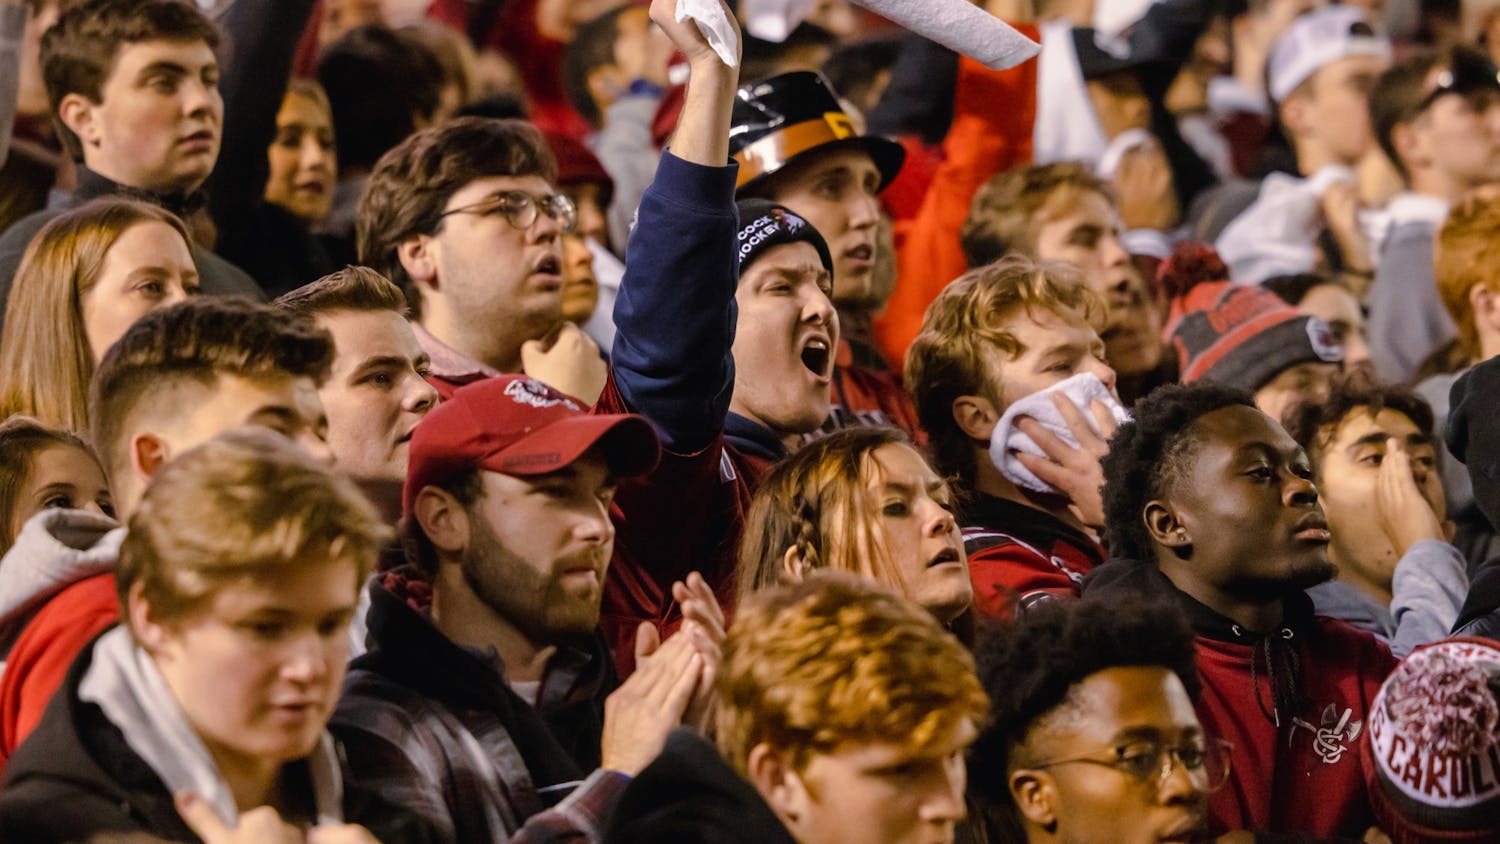 Students cheer for the Gamecocks as they play in the Palmetto Bowl against the Clemson Tigers on Nov. 27, 2021. The Tigers beat the Gamecocks 30-0.&nbsp;